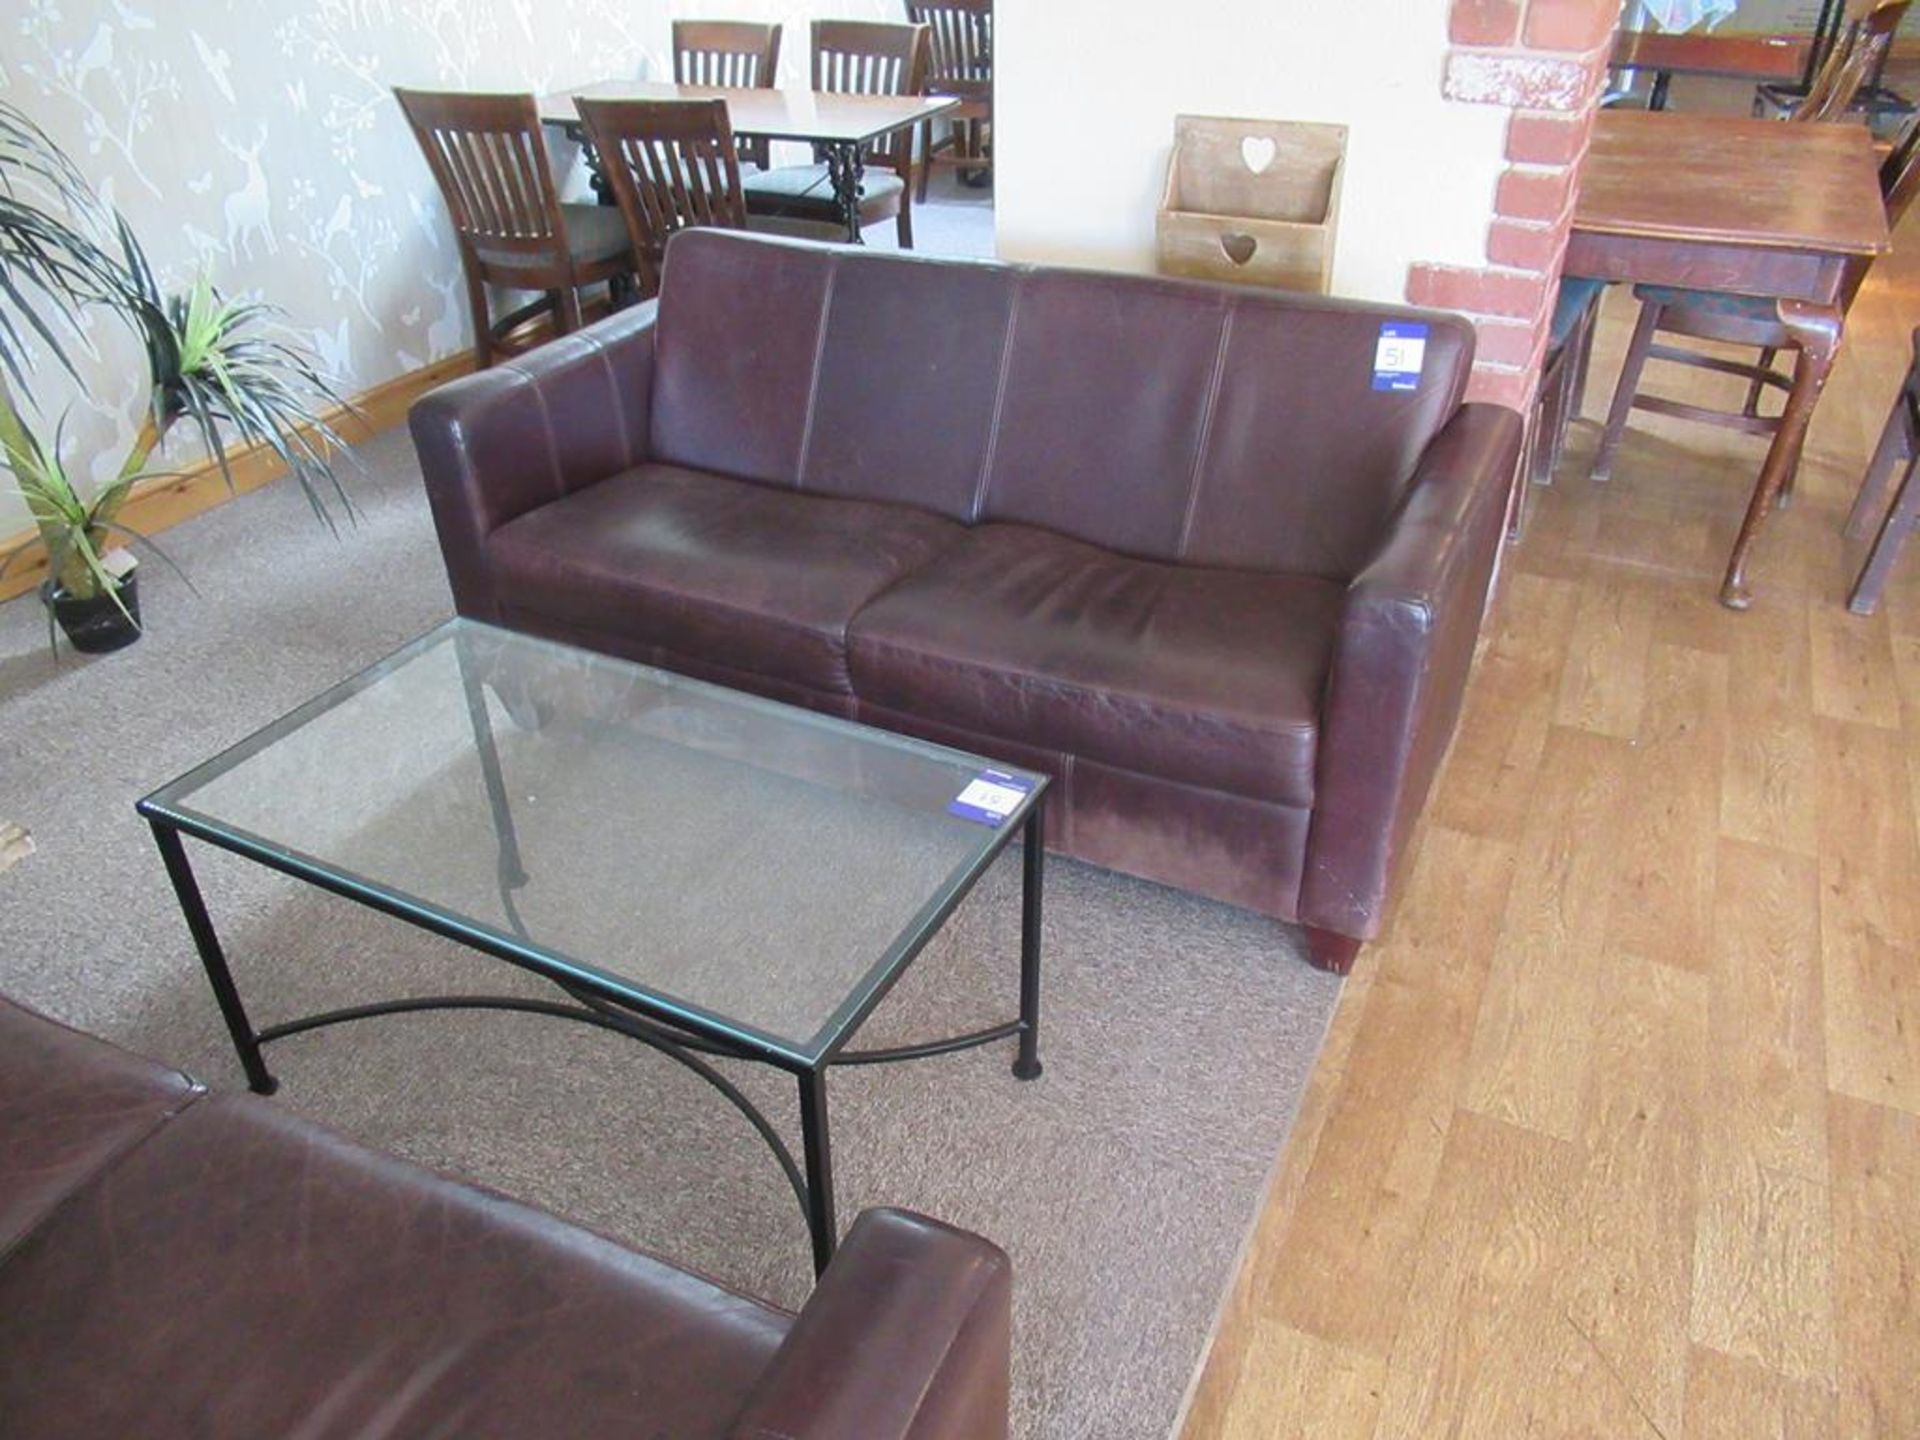 2 x Matching Leather Effect Two Seater Sofas and Metal Framed Glass Top Coffee Table - Image 3 of 3